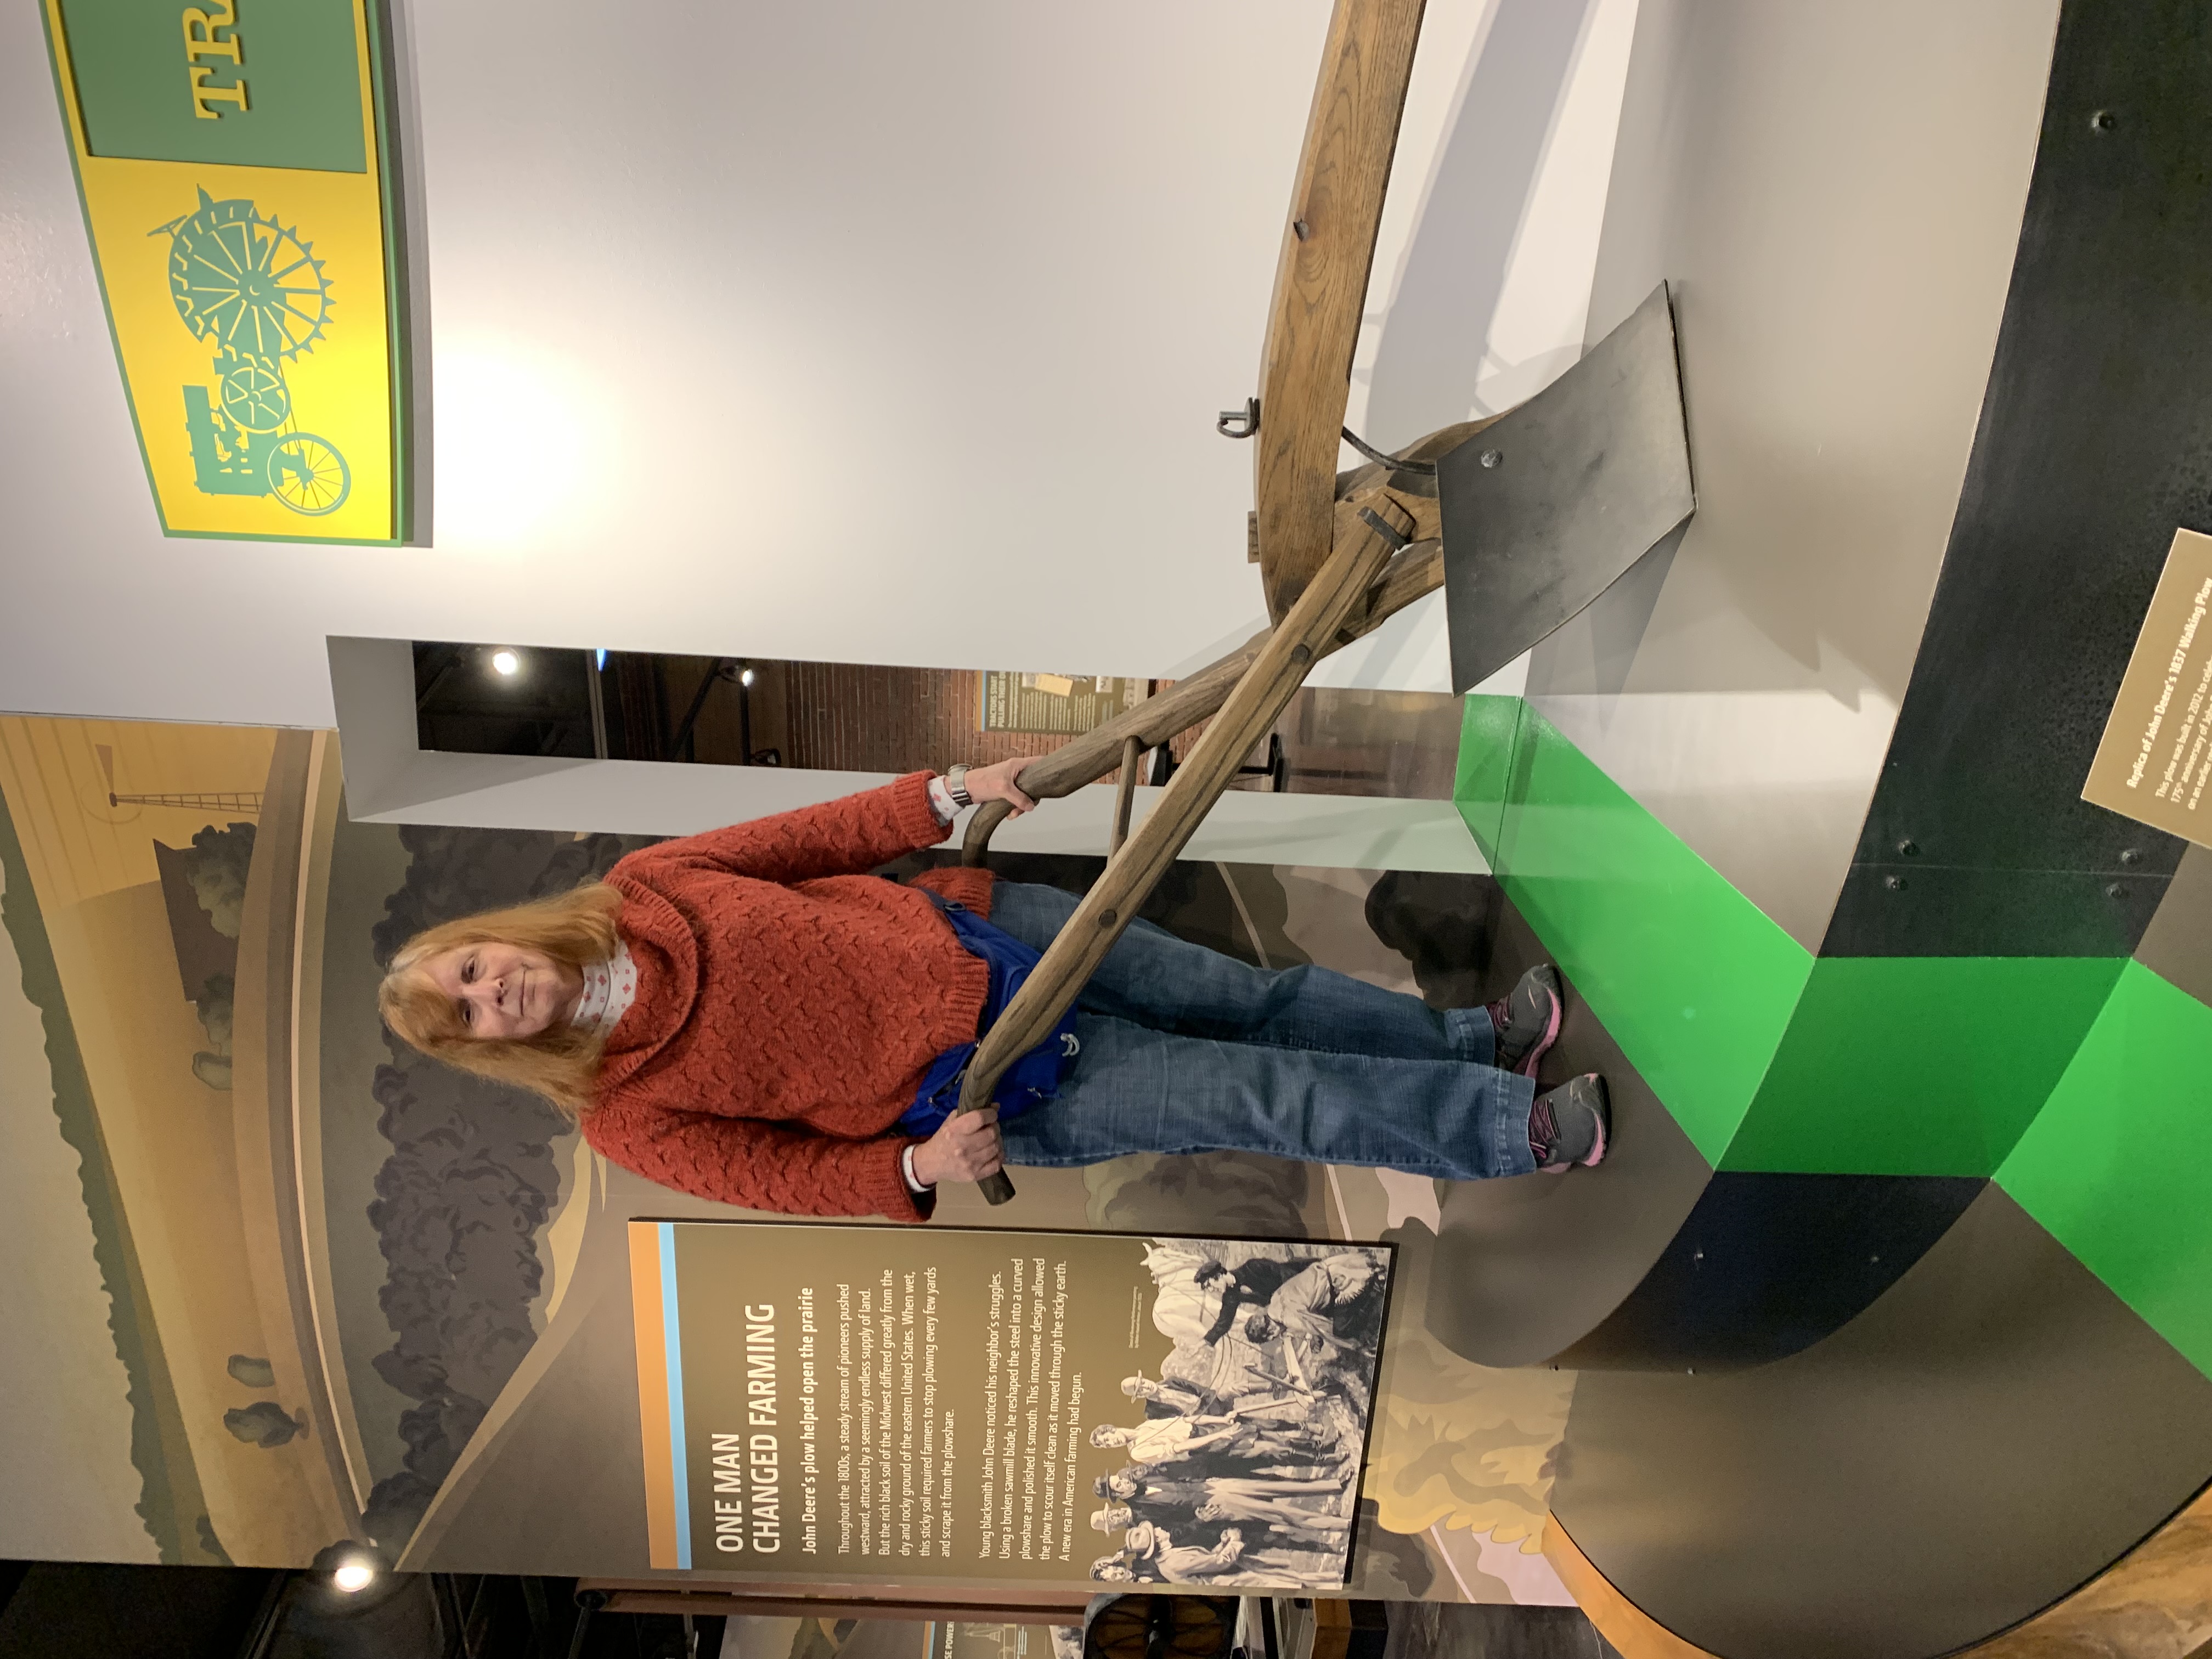 Karen stands behind a replica of John Deere’s sod-busting plow he invented in 1837. A stout wooden beam supports a curved, diamond-shaped plowshare, made from a sawmill blade. The point cuts the sod and starts it curving up and across the face of the plowshare. As the sod slides across the steel, it continually scours the surface clean so the plow doesn’t get clogged by the sticky prairie soil.